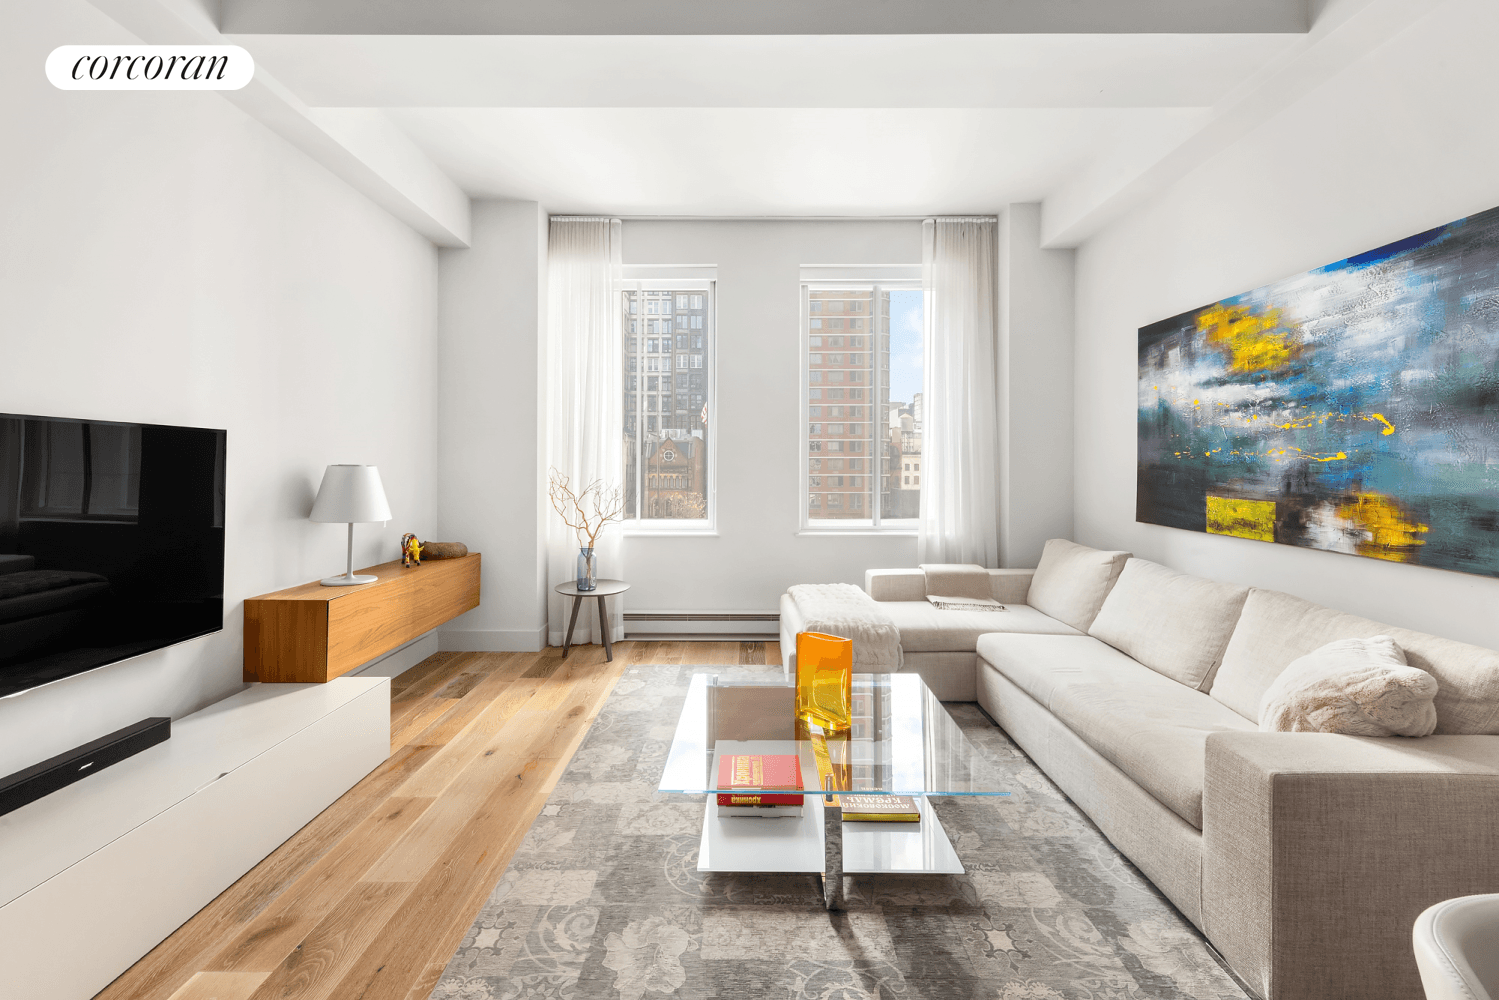 Sun drenched with open city views, residence 506 is one of the rarely available two bedroom units with all south facing windows at 93 Worth St.